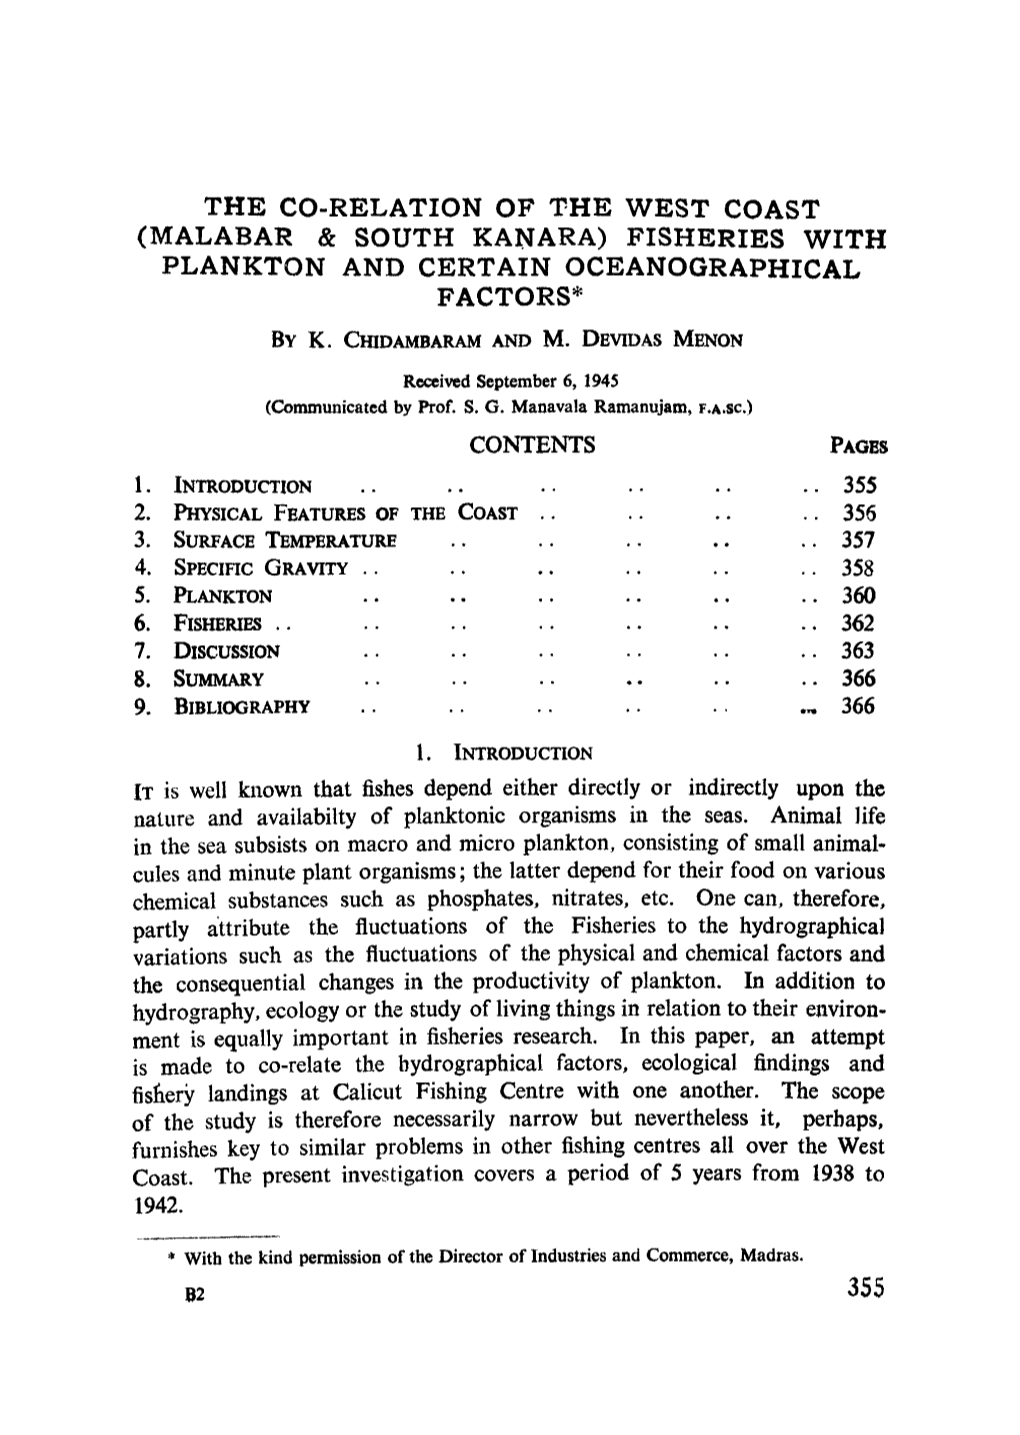 Fisheries with Plankton and Certain Oceanographical Factors*